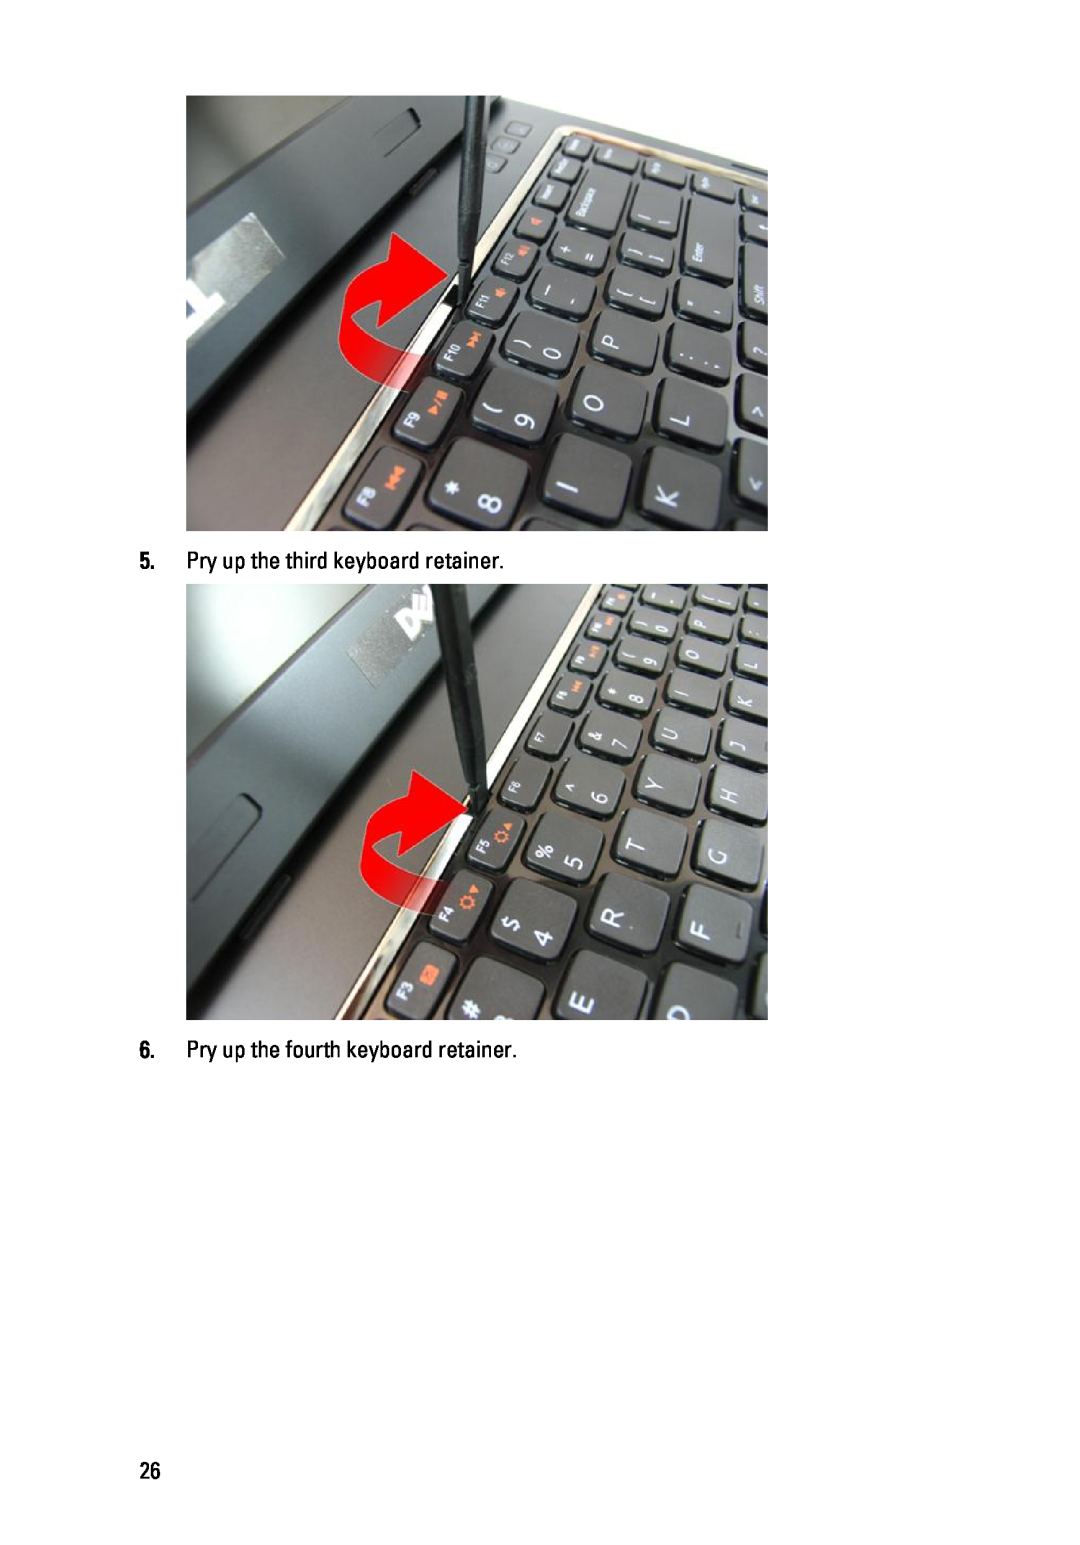 Dell 3450 owner manual Pry up the third keyboard retainer, Pry up the fourth keyboard retainer 